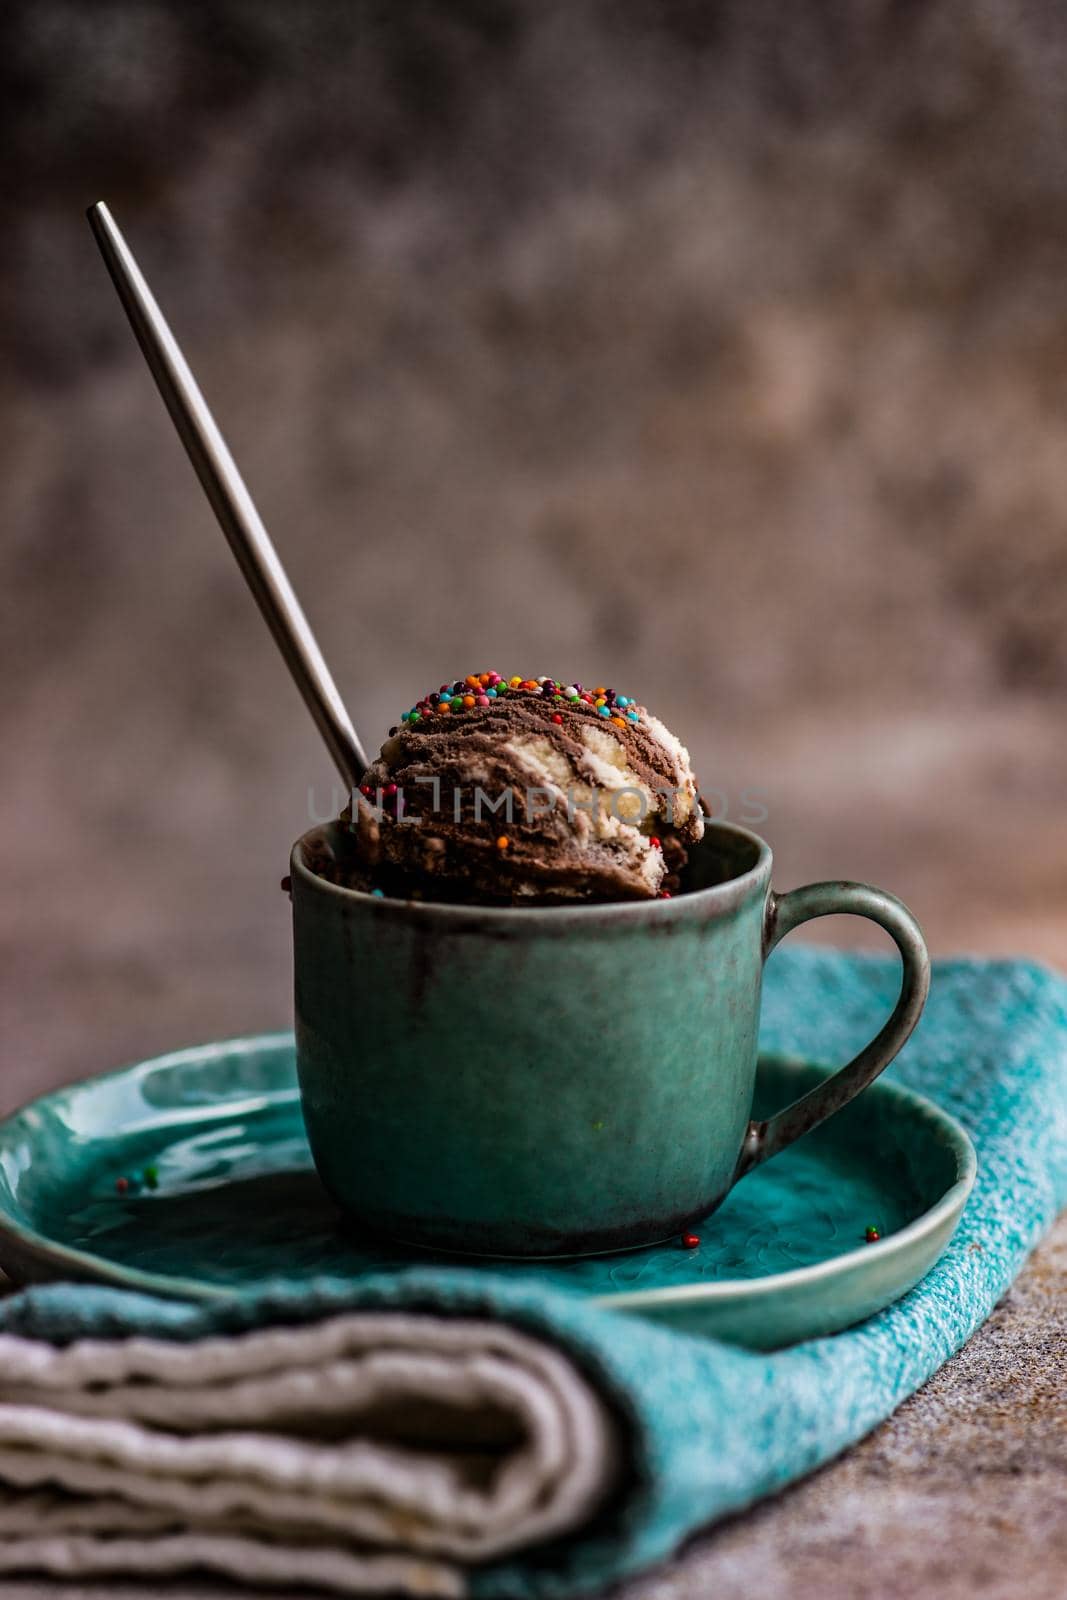 Sweet homemade chocolate ice cream with nuts served in a cup